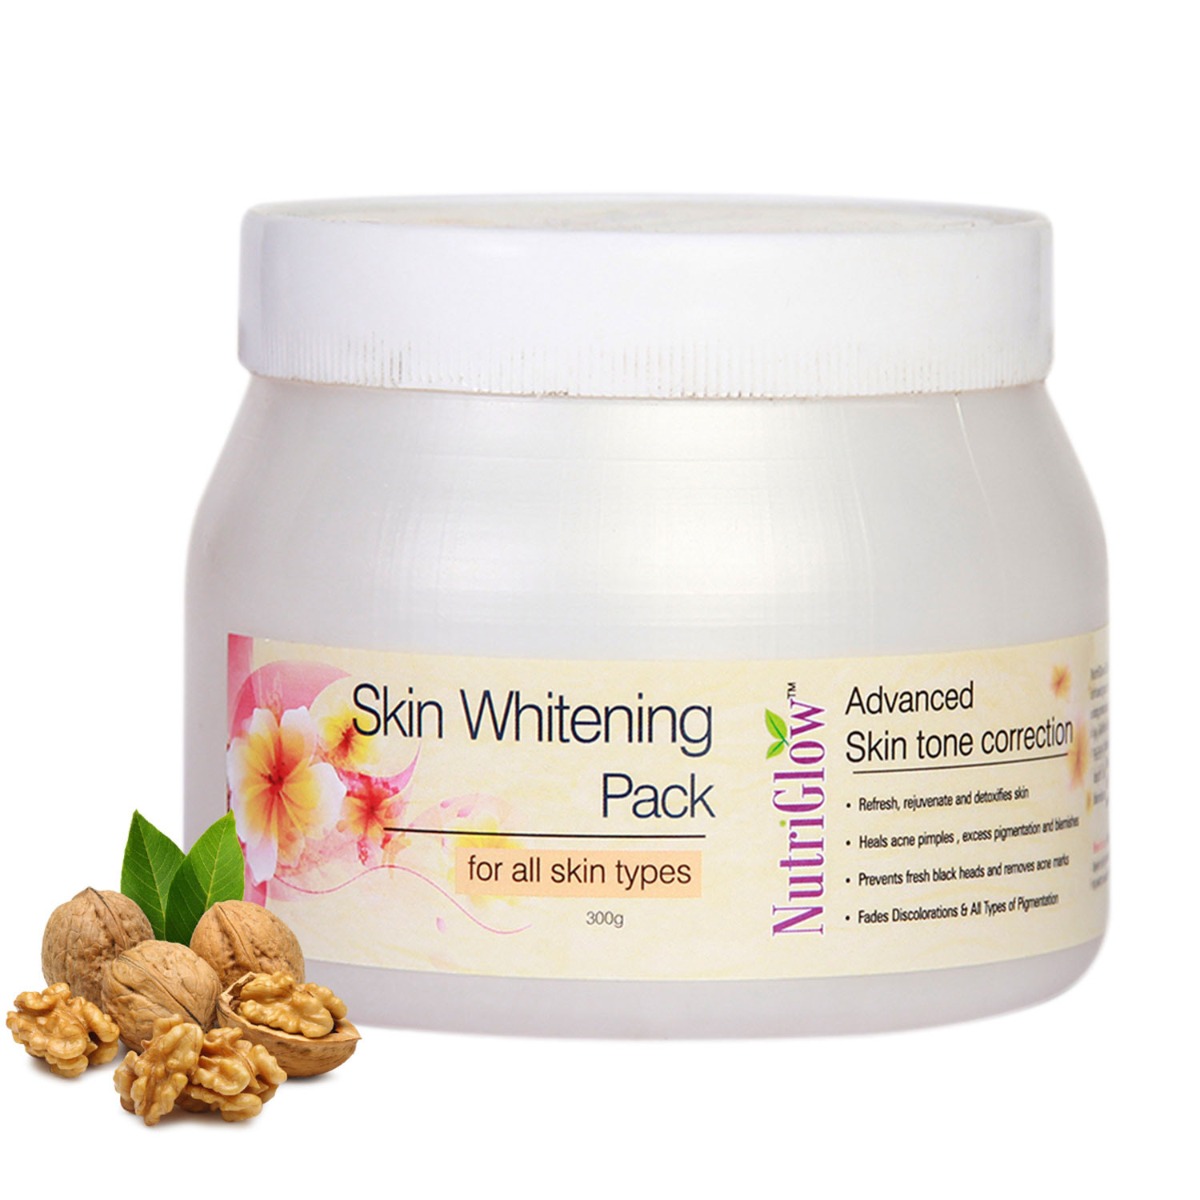 NutriGlow Skin Whitening Pore Cleansing Face Pack For Glowing Skin, 300gm